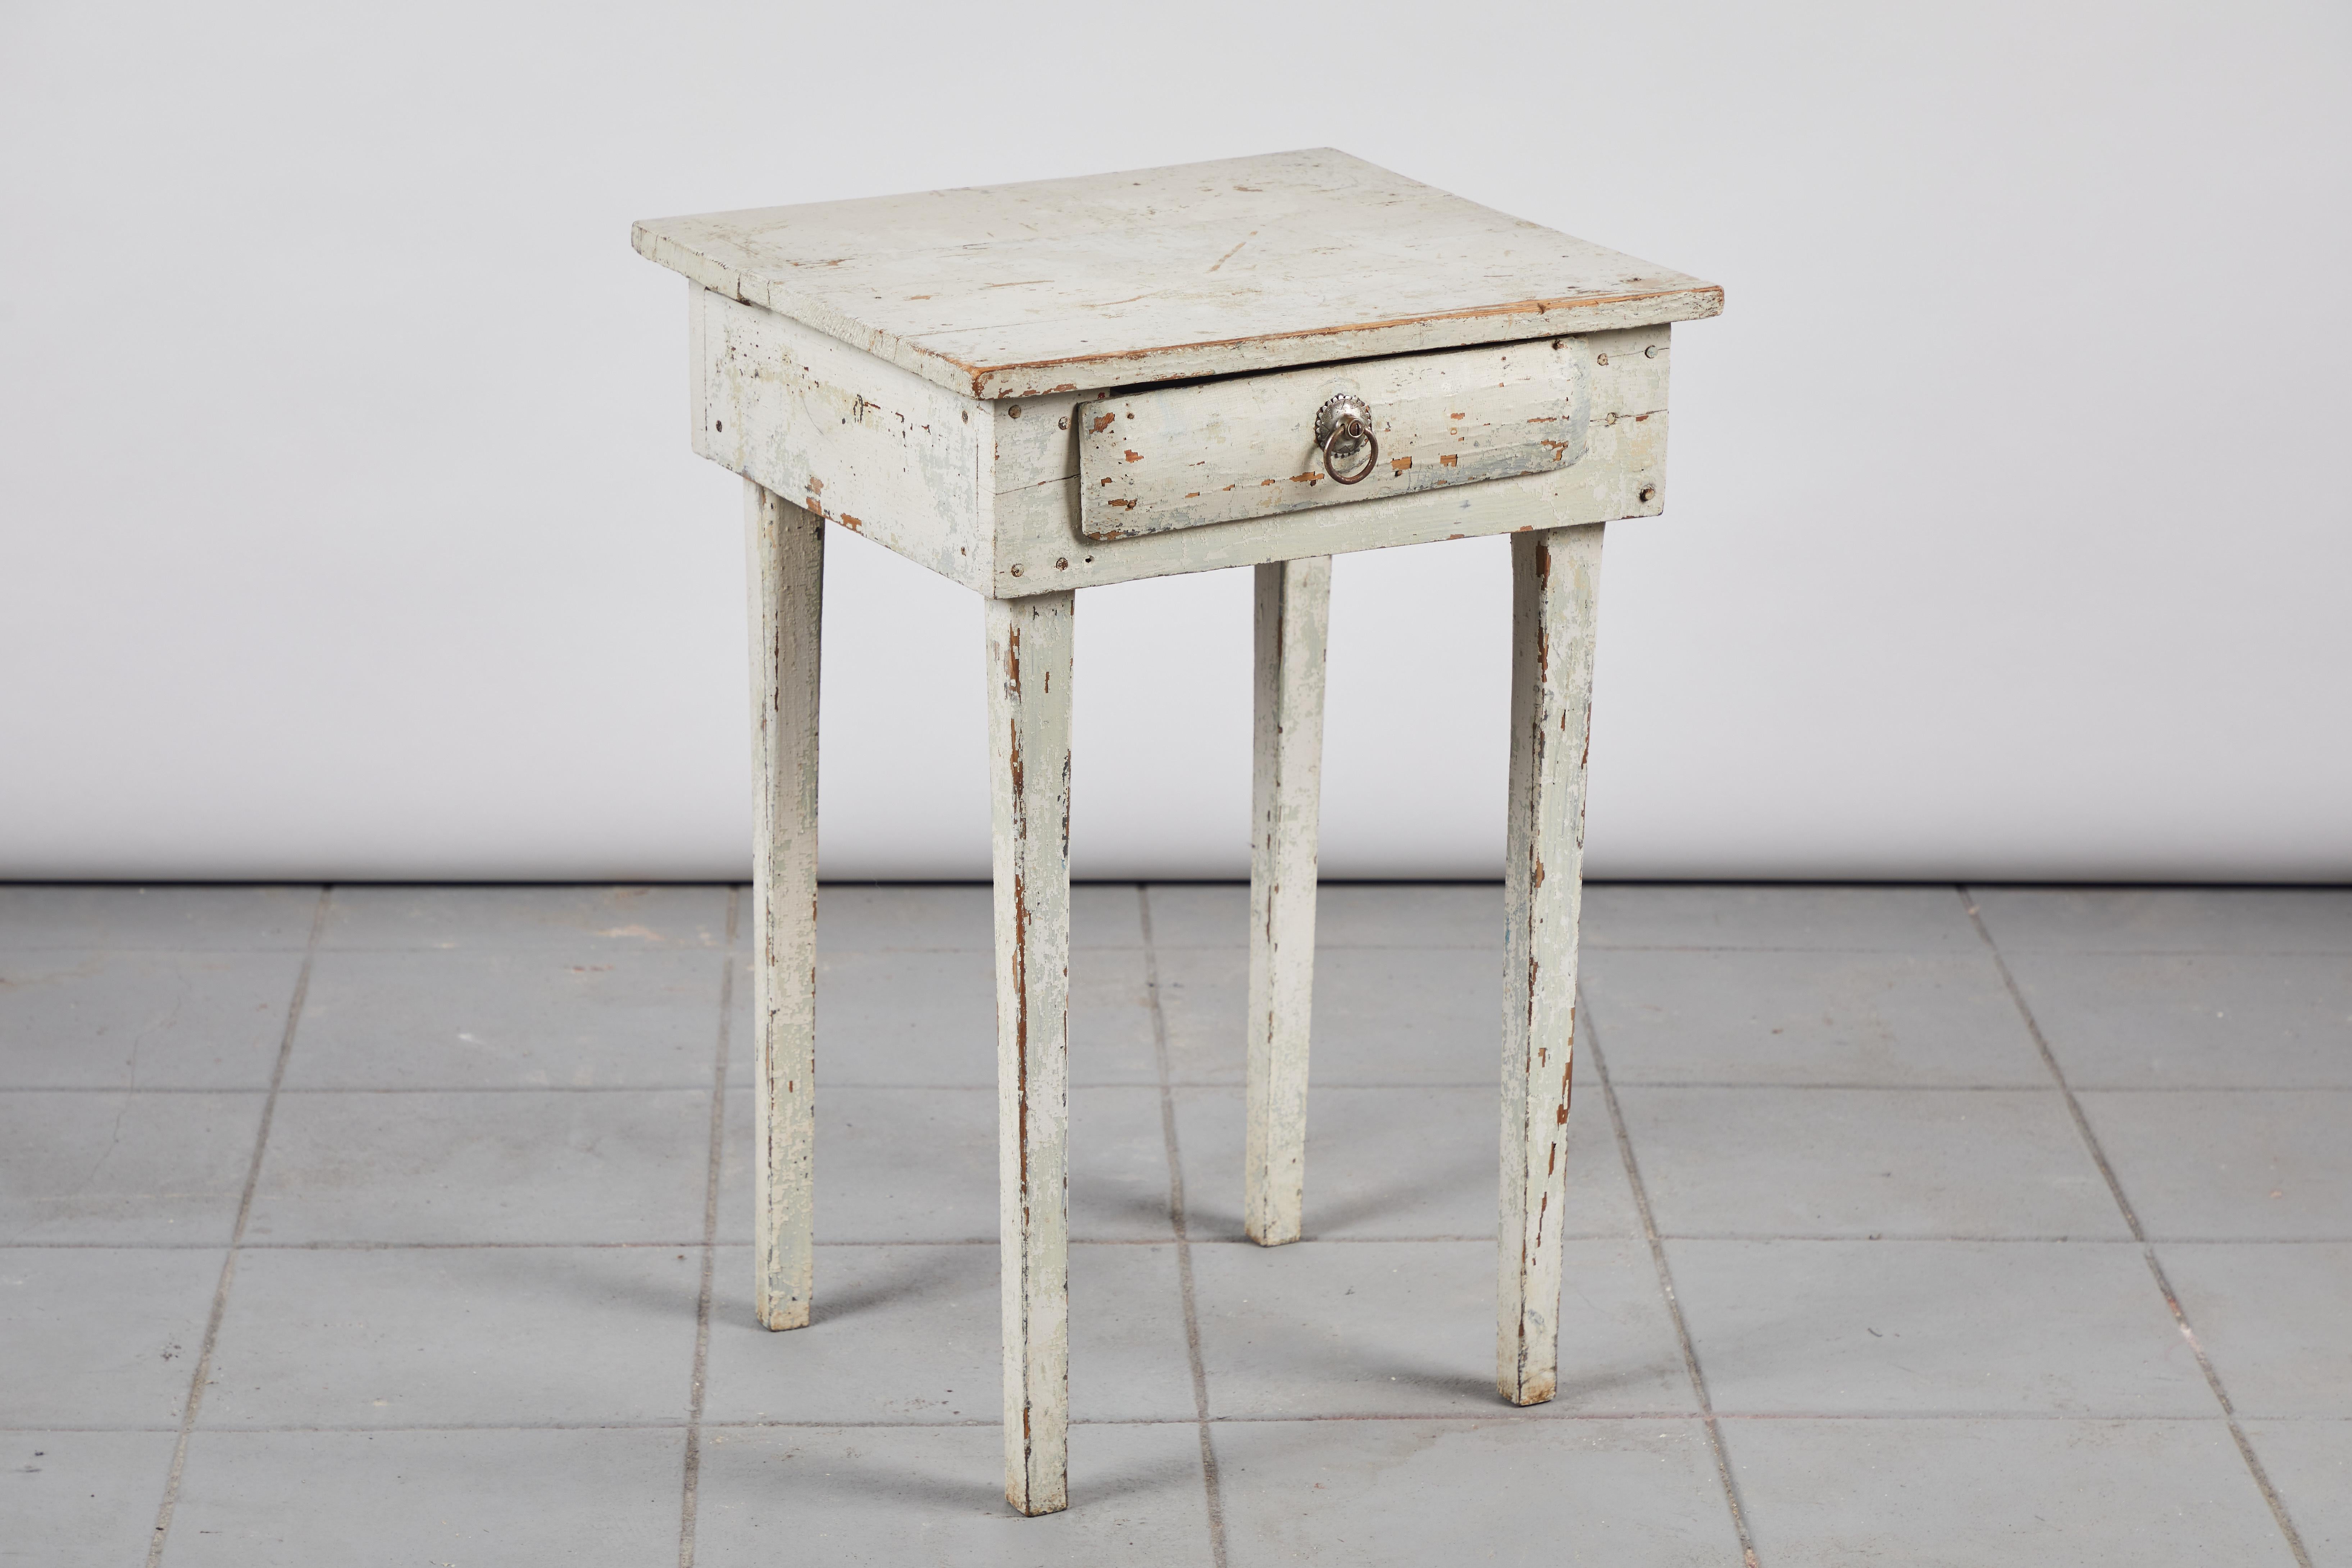 Wood Early American Rustic White Painted Side Table